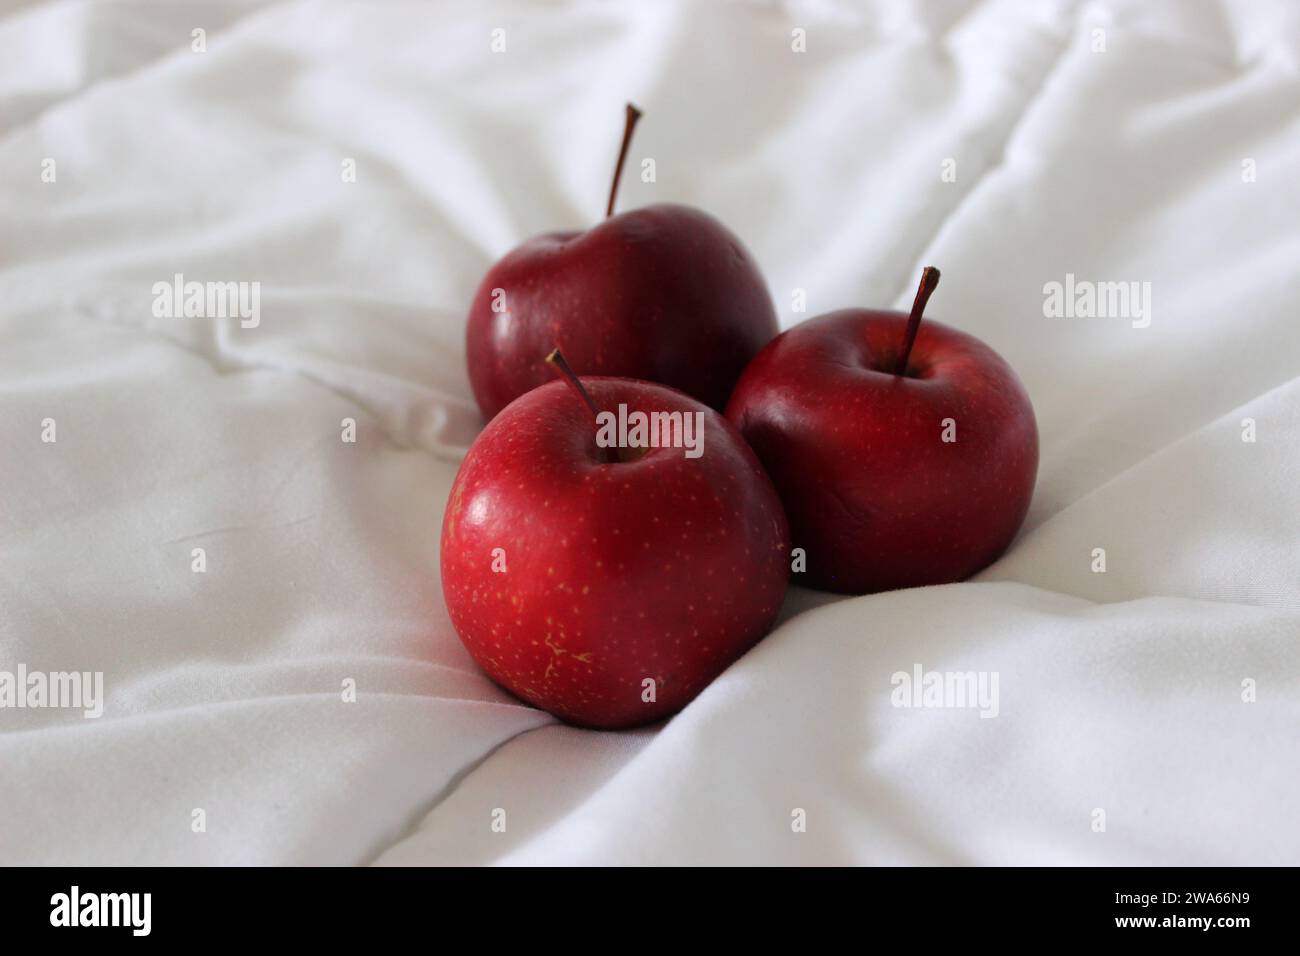 Three fresh red apples on a clean white blanket stock photo for backgrounds Stock Photo